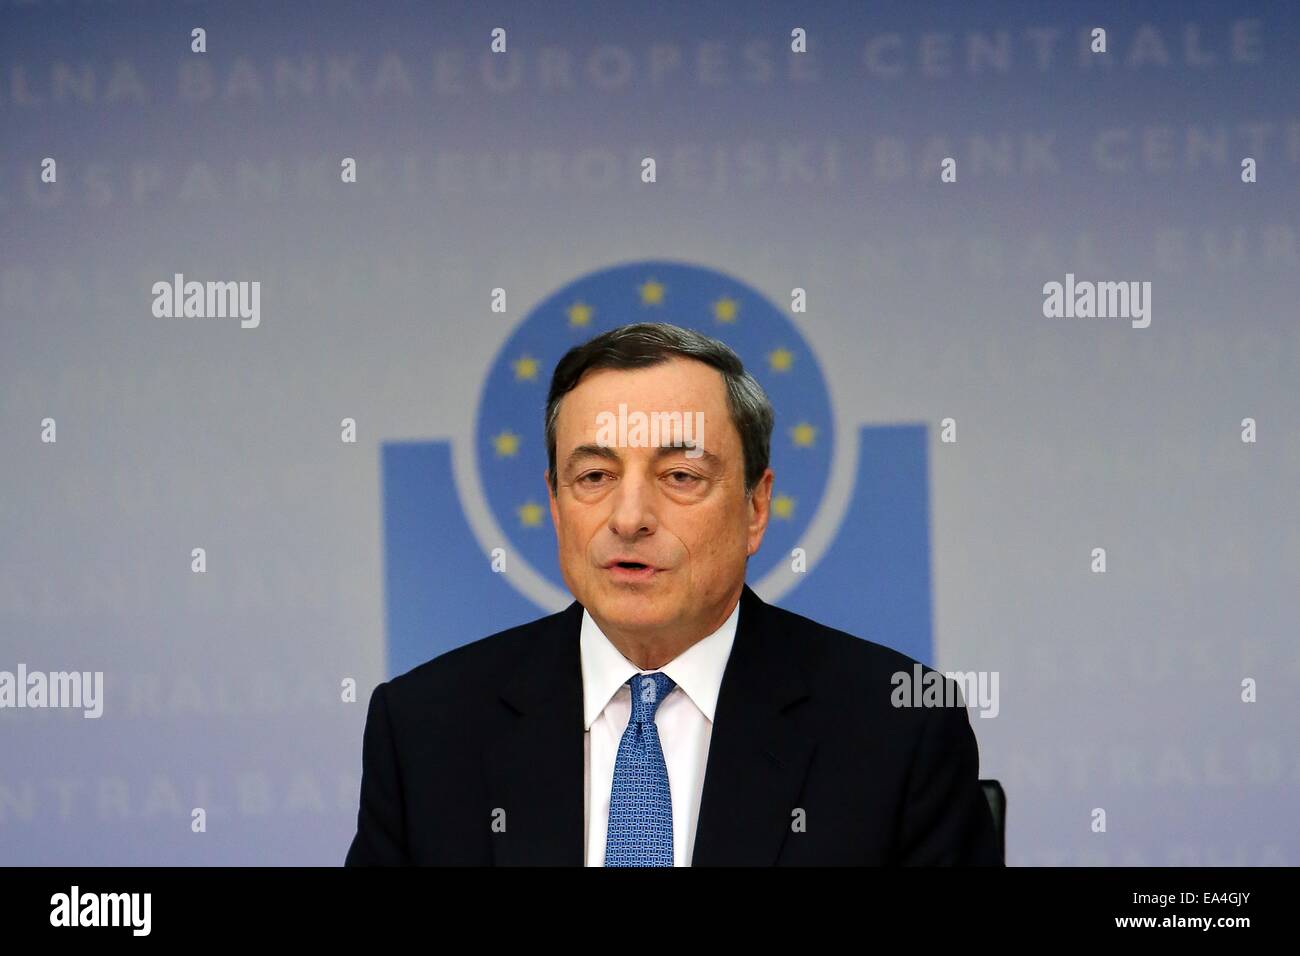 Mario Draghi, president of the European Central Bank speaks during a press conference in Frankfurt/Main, Germany, 06 November 2014. The European Central Bank leaves its base rate at a historical low of 0, 05 percent. Fredrik von Erichsen/dpa Stock Photo